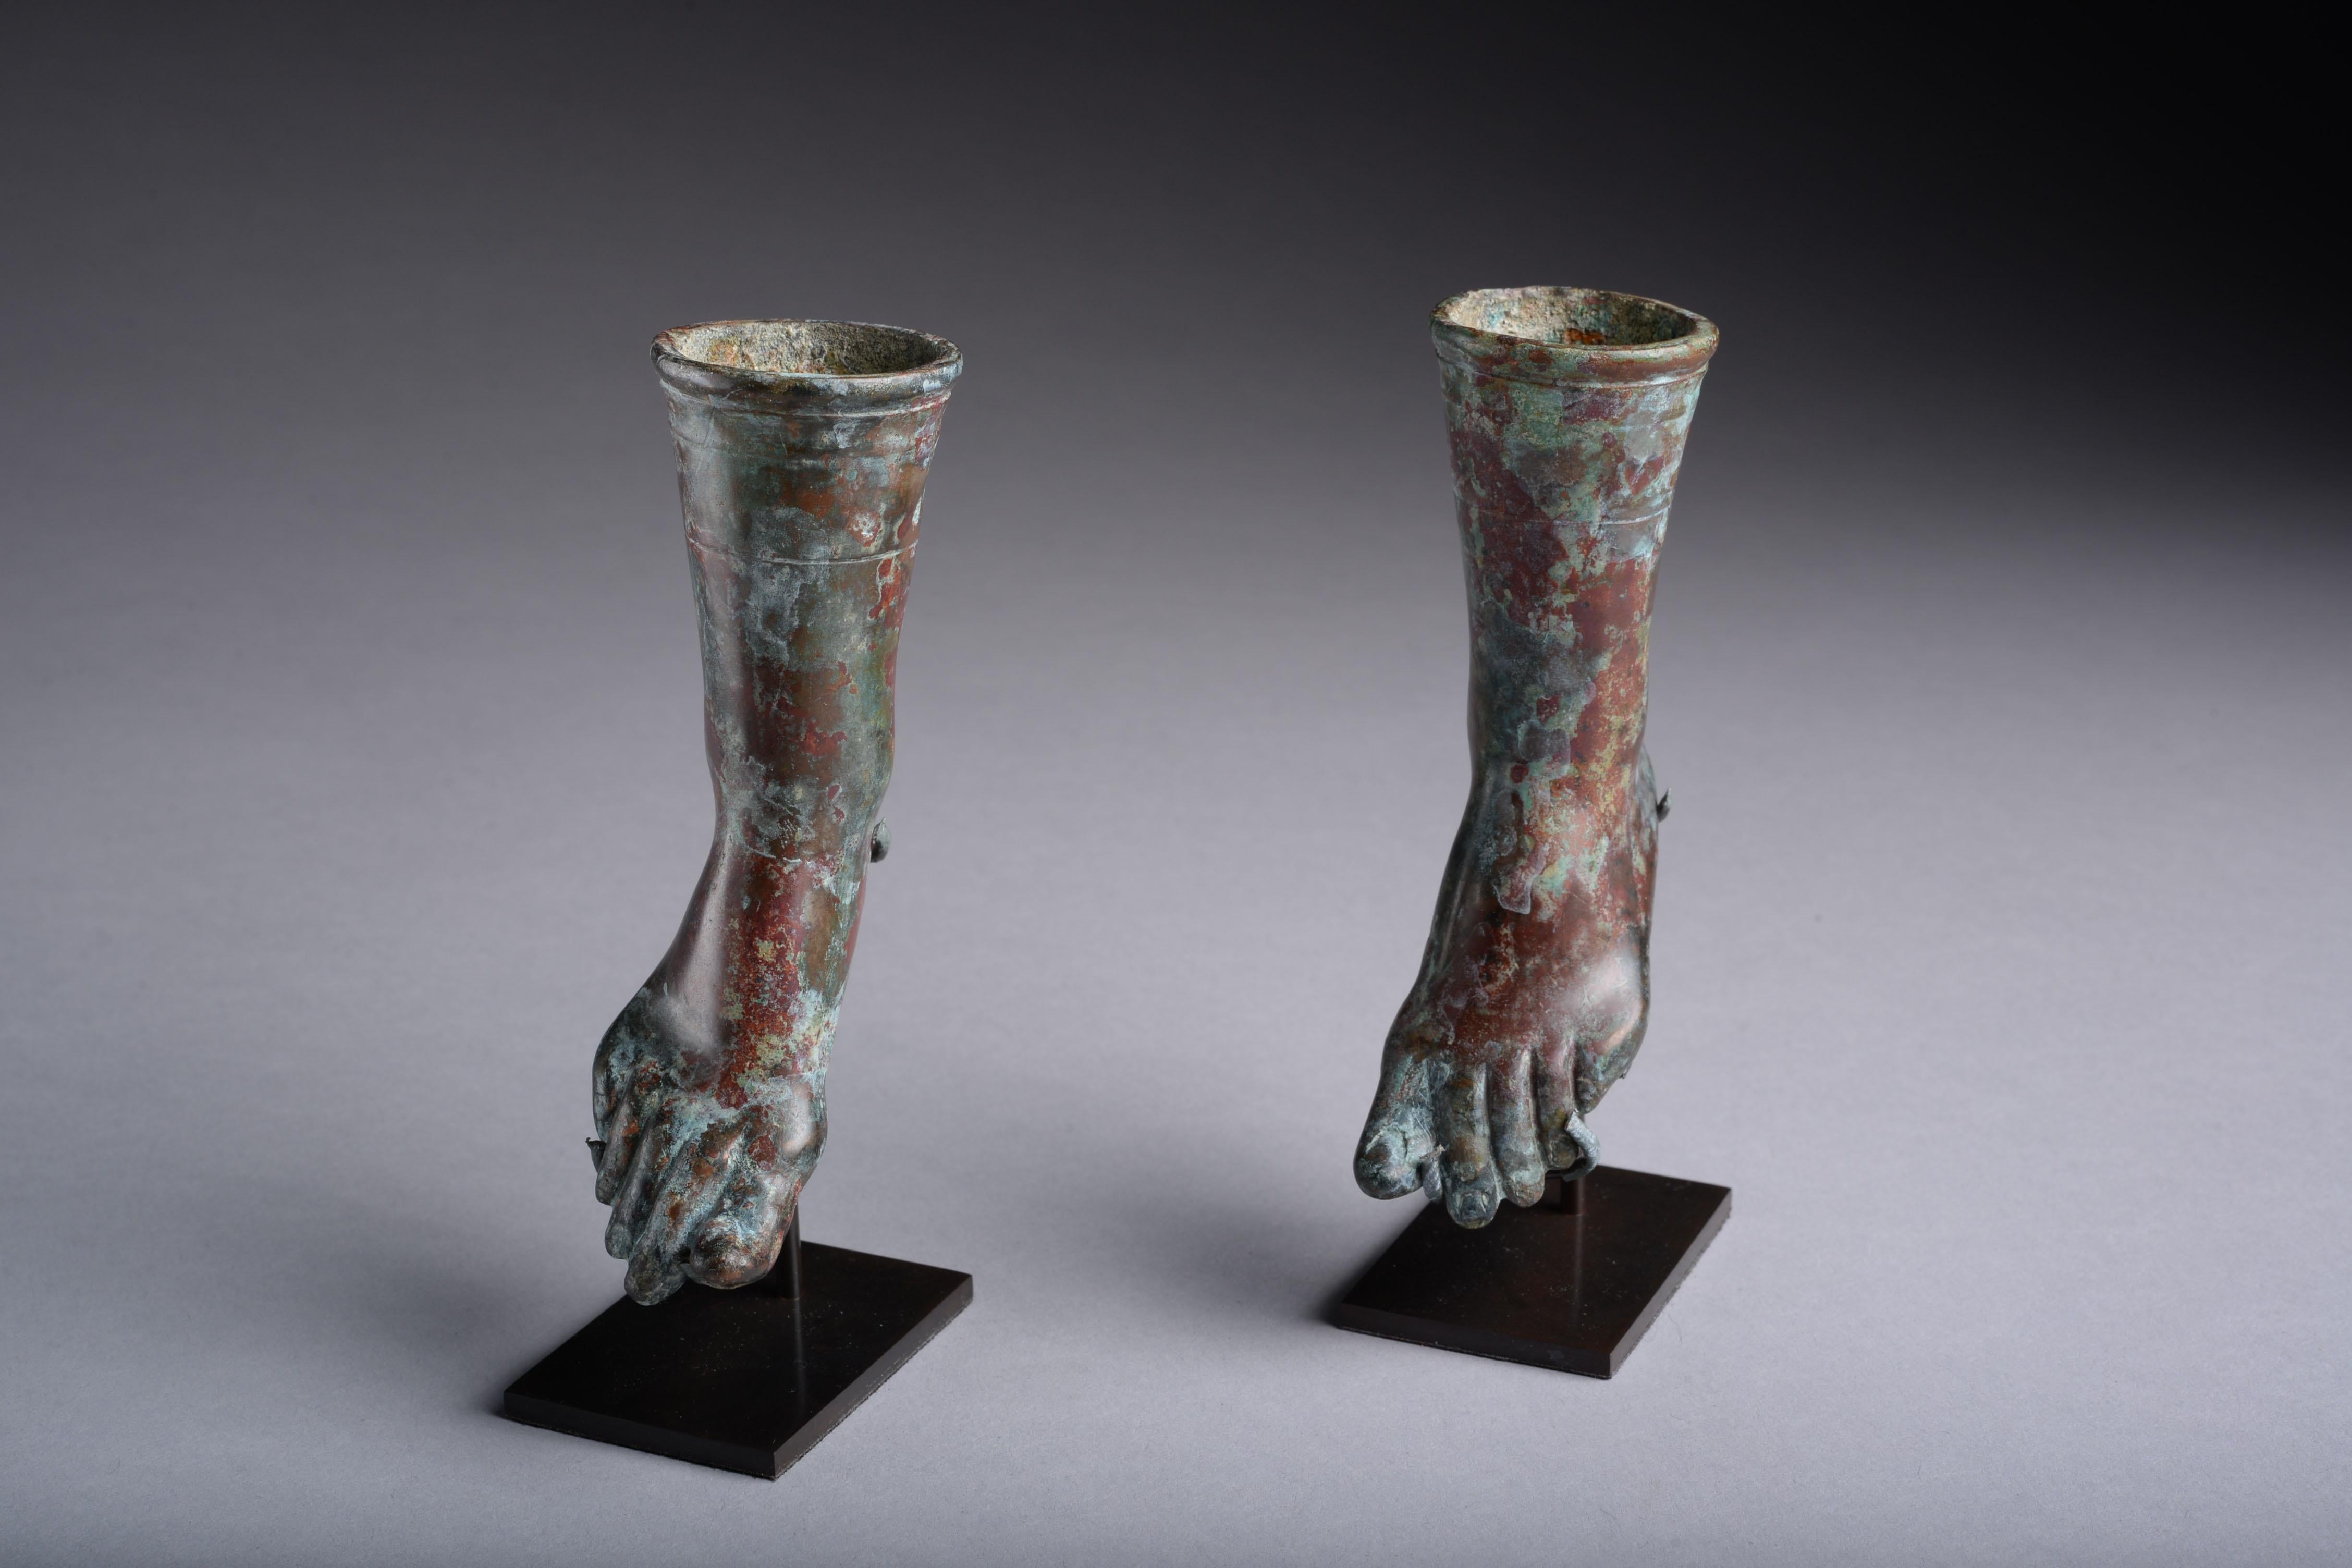 A pair of bronze fittings from a large Roman vessel or piece of furniture, dating to the 1st century AD.

In the form of bare human feet, finely modelled to show the nails and creases of skin, the big toes slightly raised.

Measures: Height 4